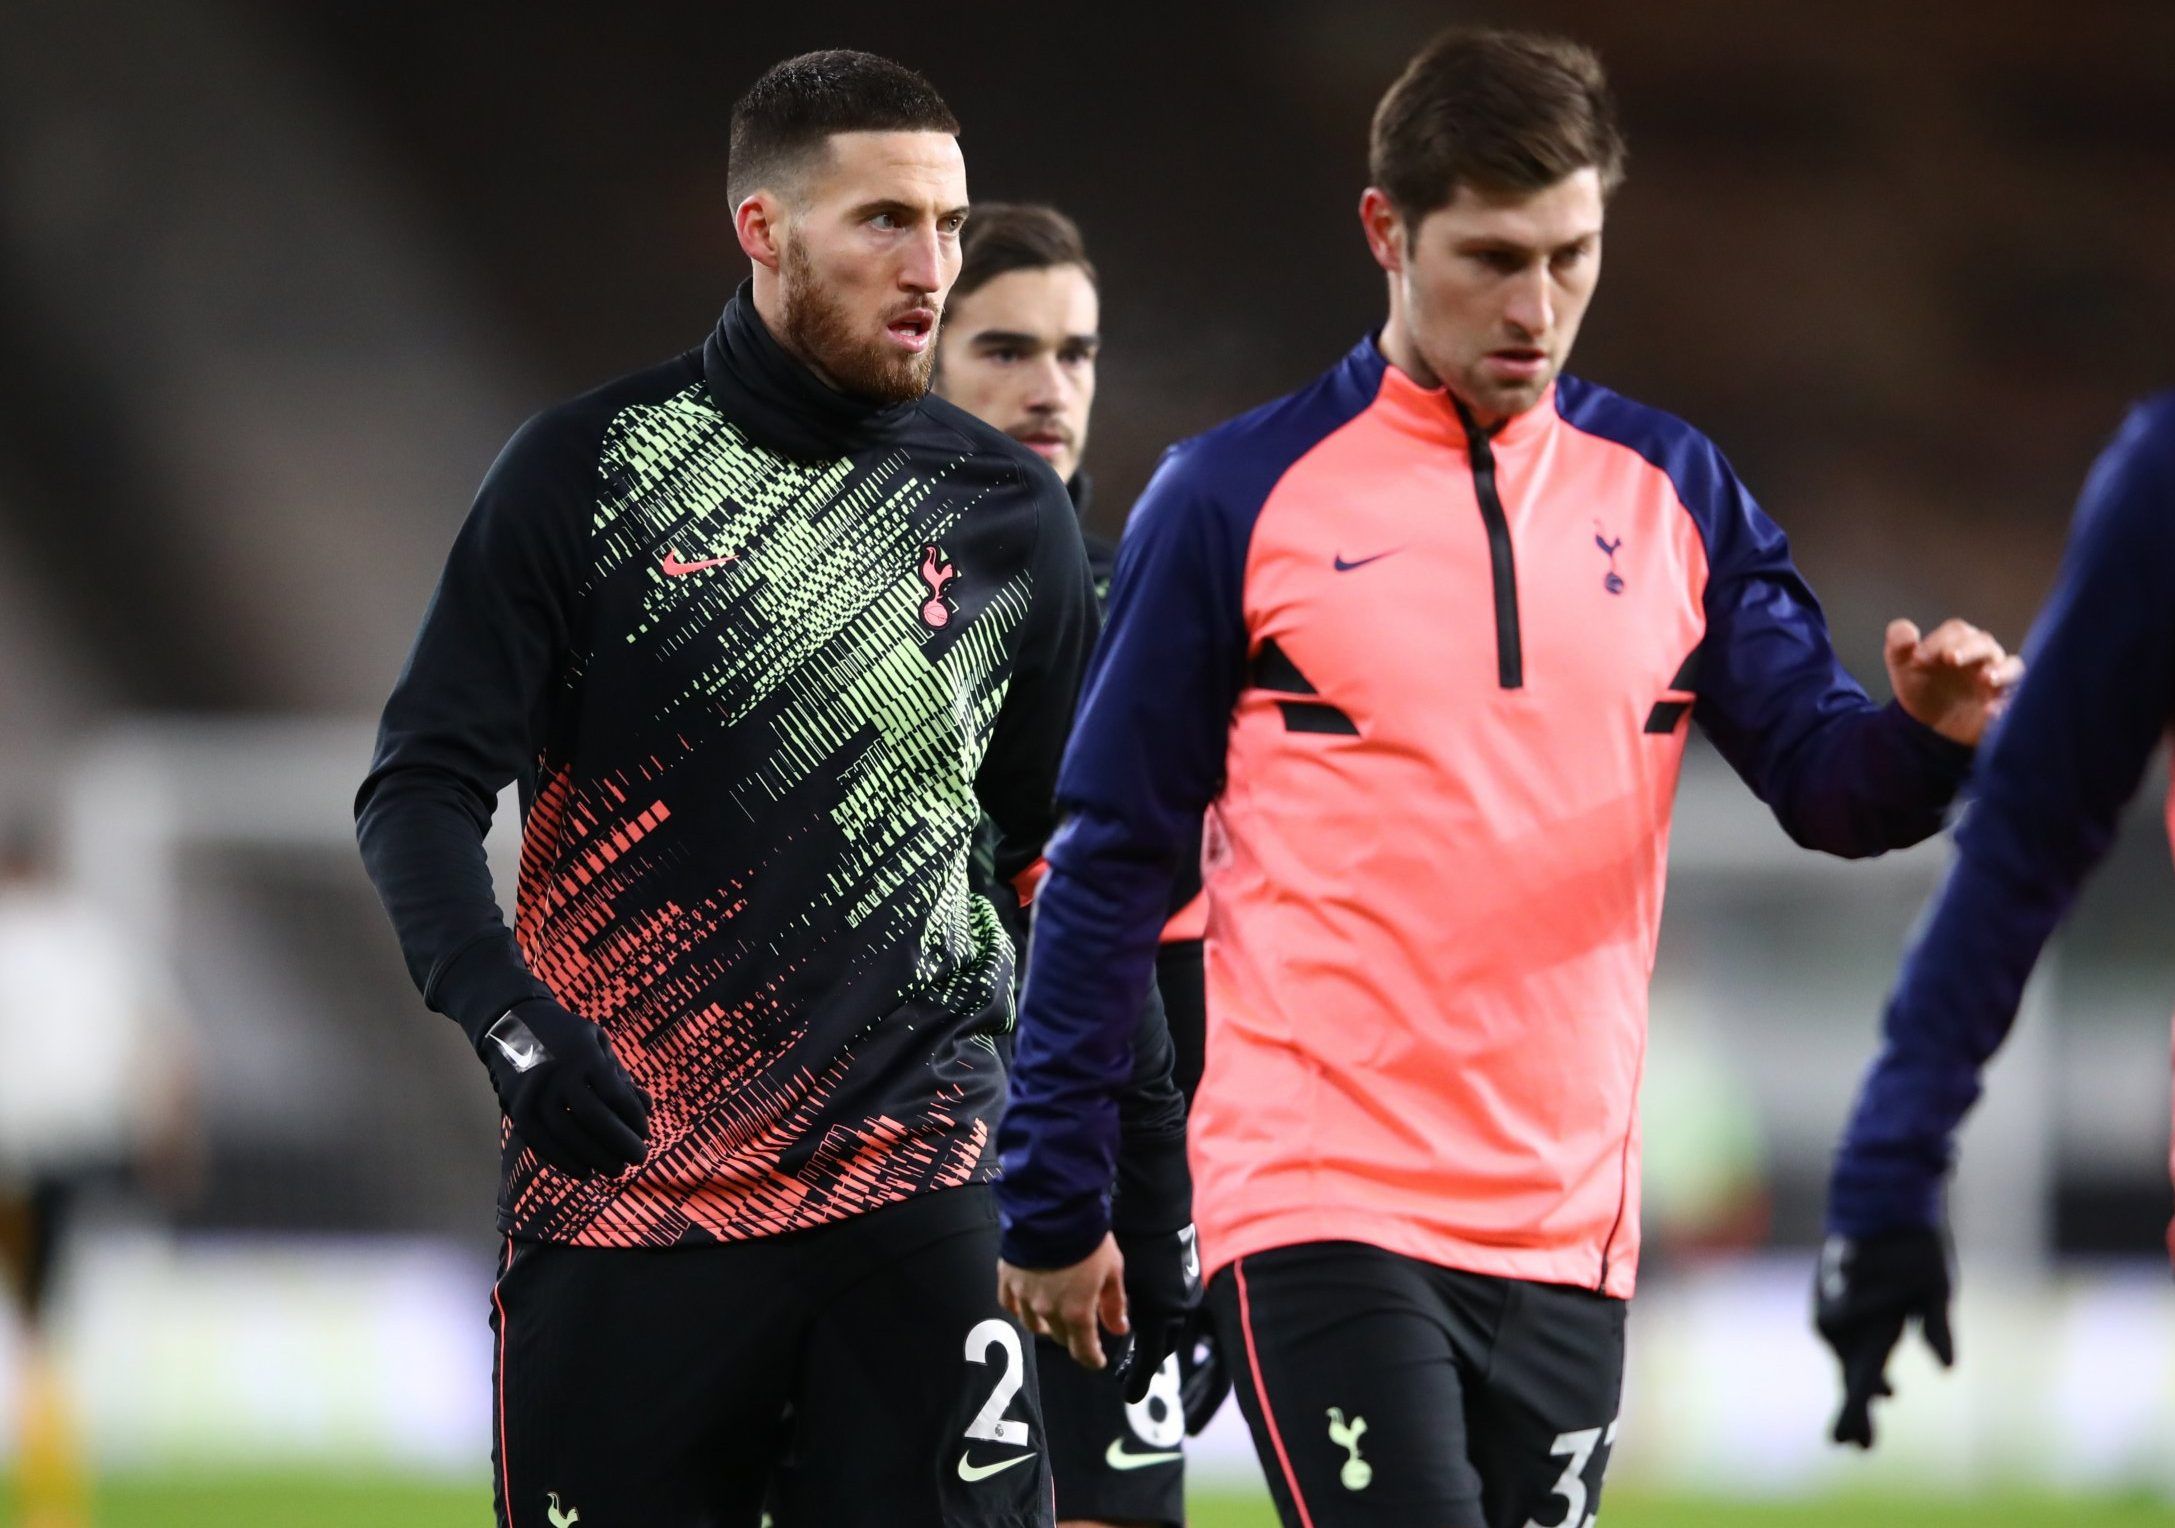 Tottenham Hotspur defender Matt Doherty looks on during warm up against Wolves in the Premier League